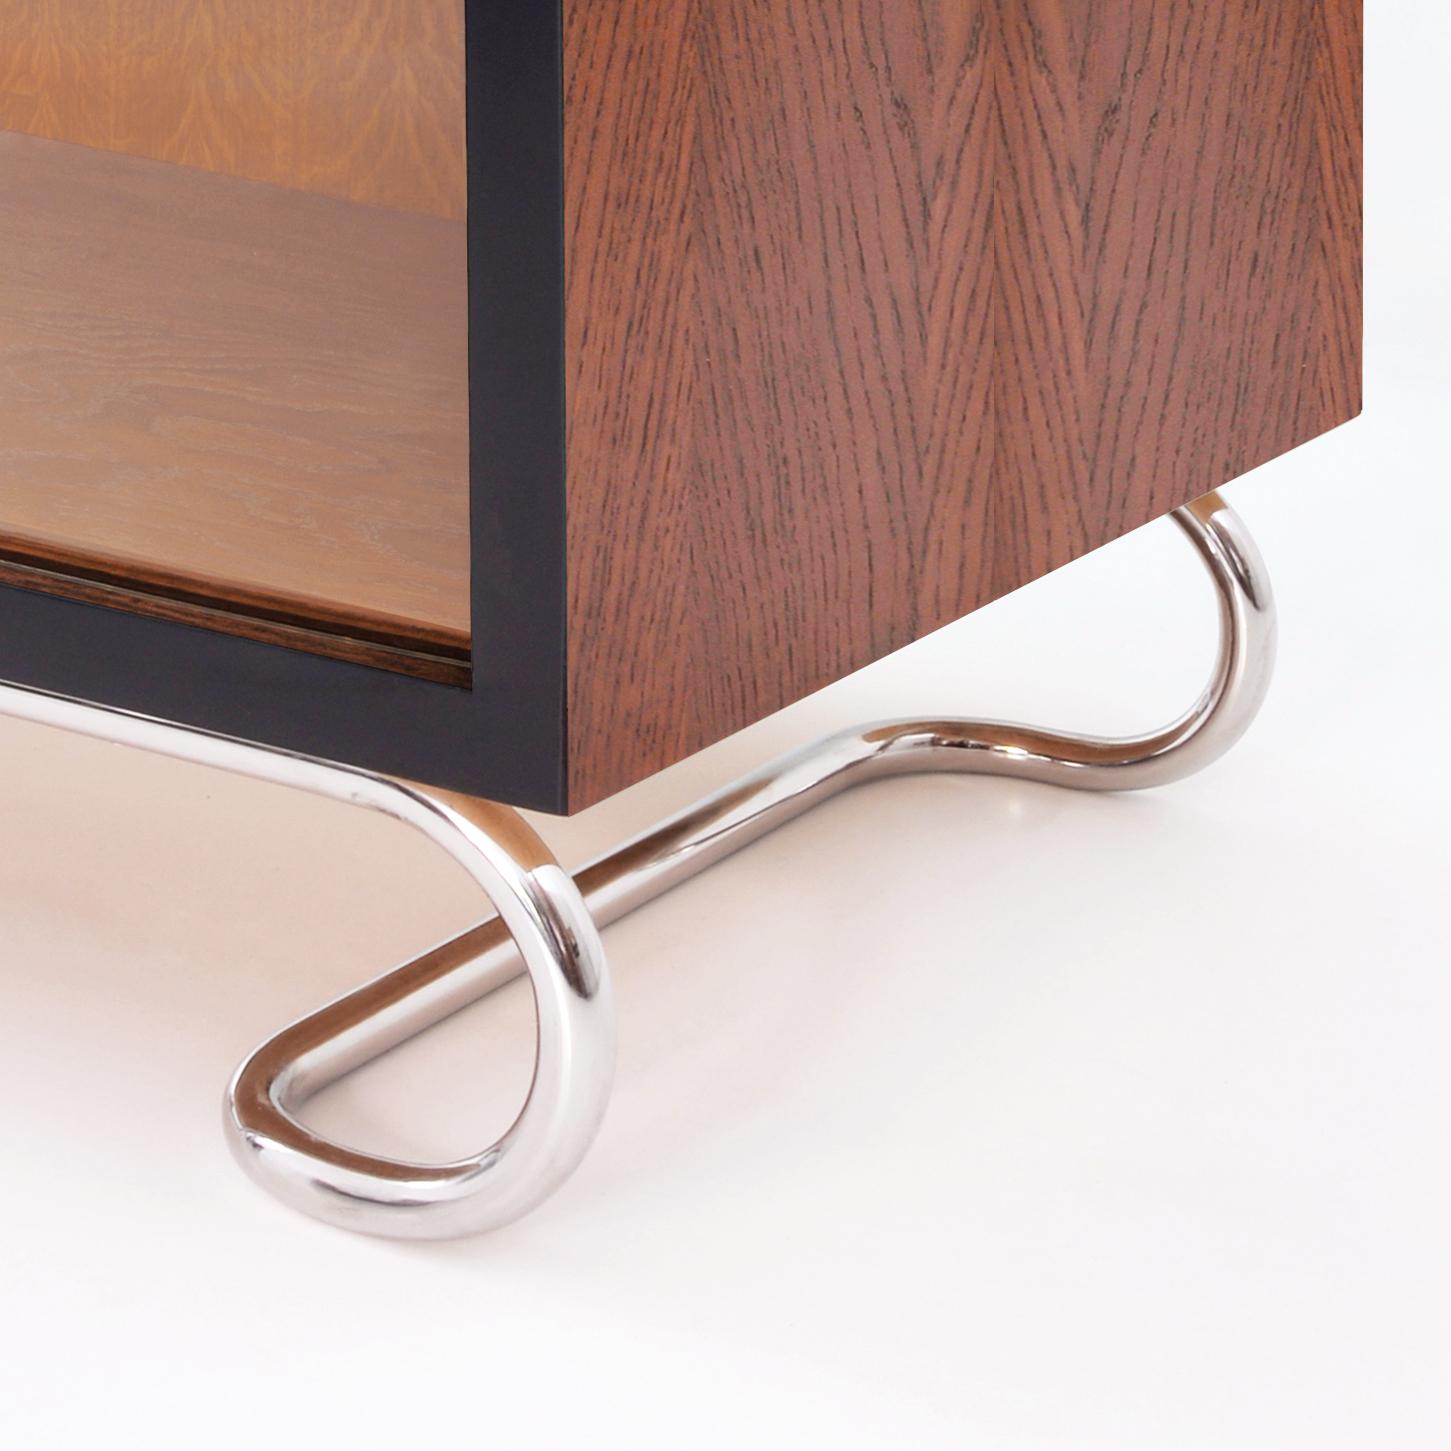 Contemporary Modernist Secretary Showcase, Lacquered Wood, Chrome-Plated Metal, Customizable For Sale